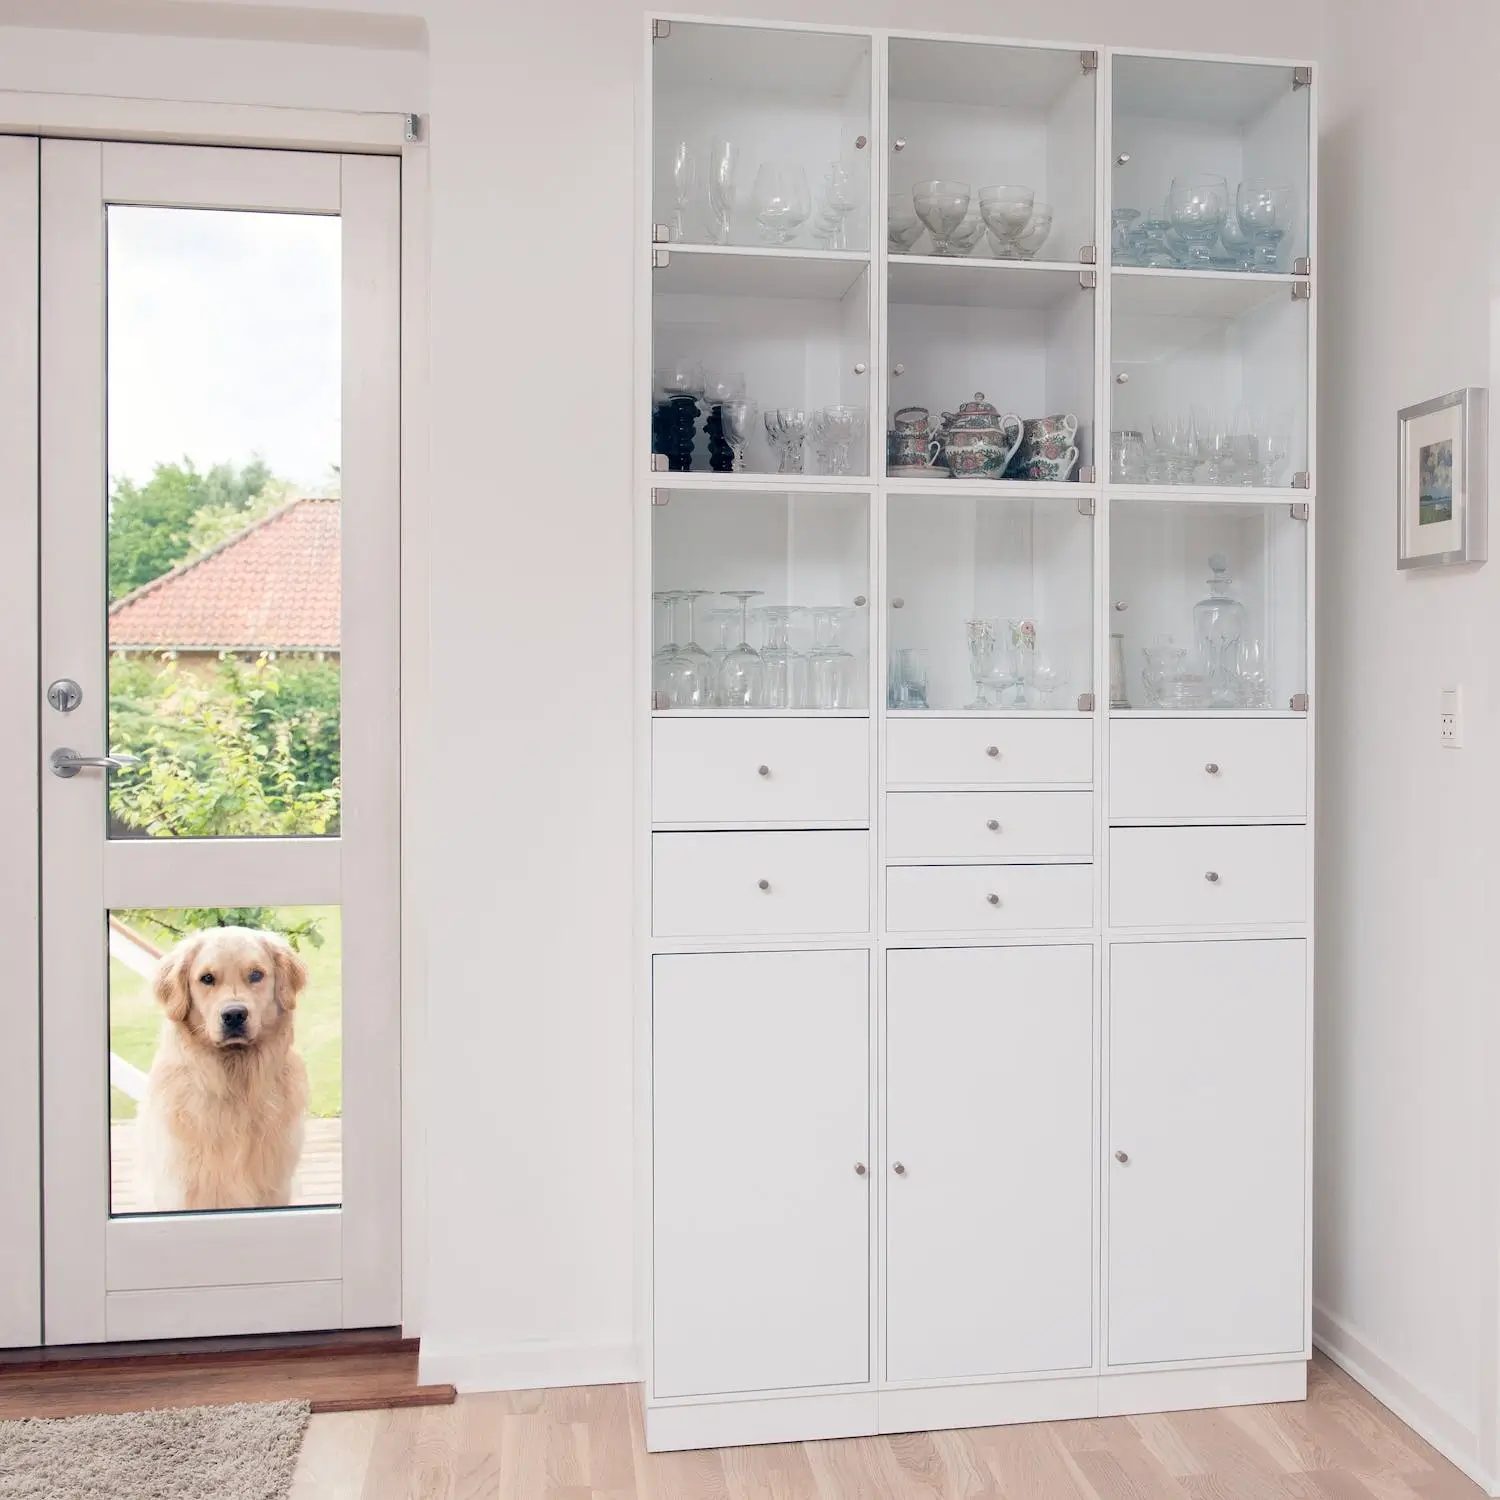 A golden retriever looks through a glass door into a house with white walls and white cabinets.